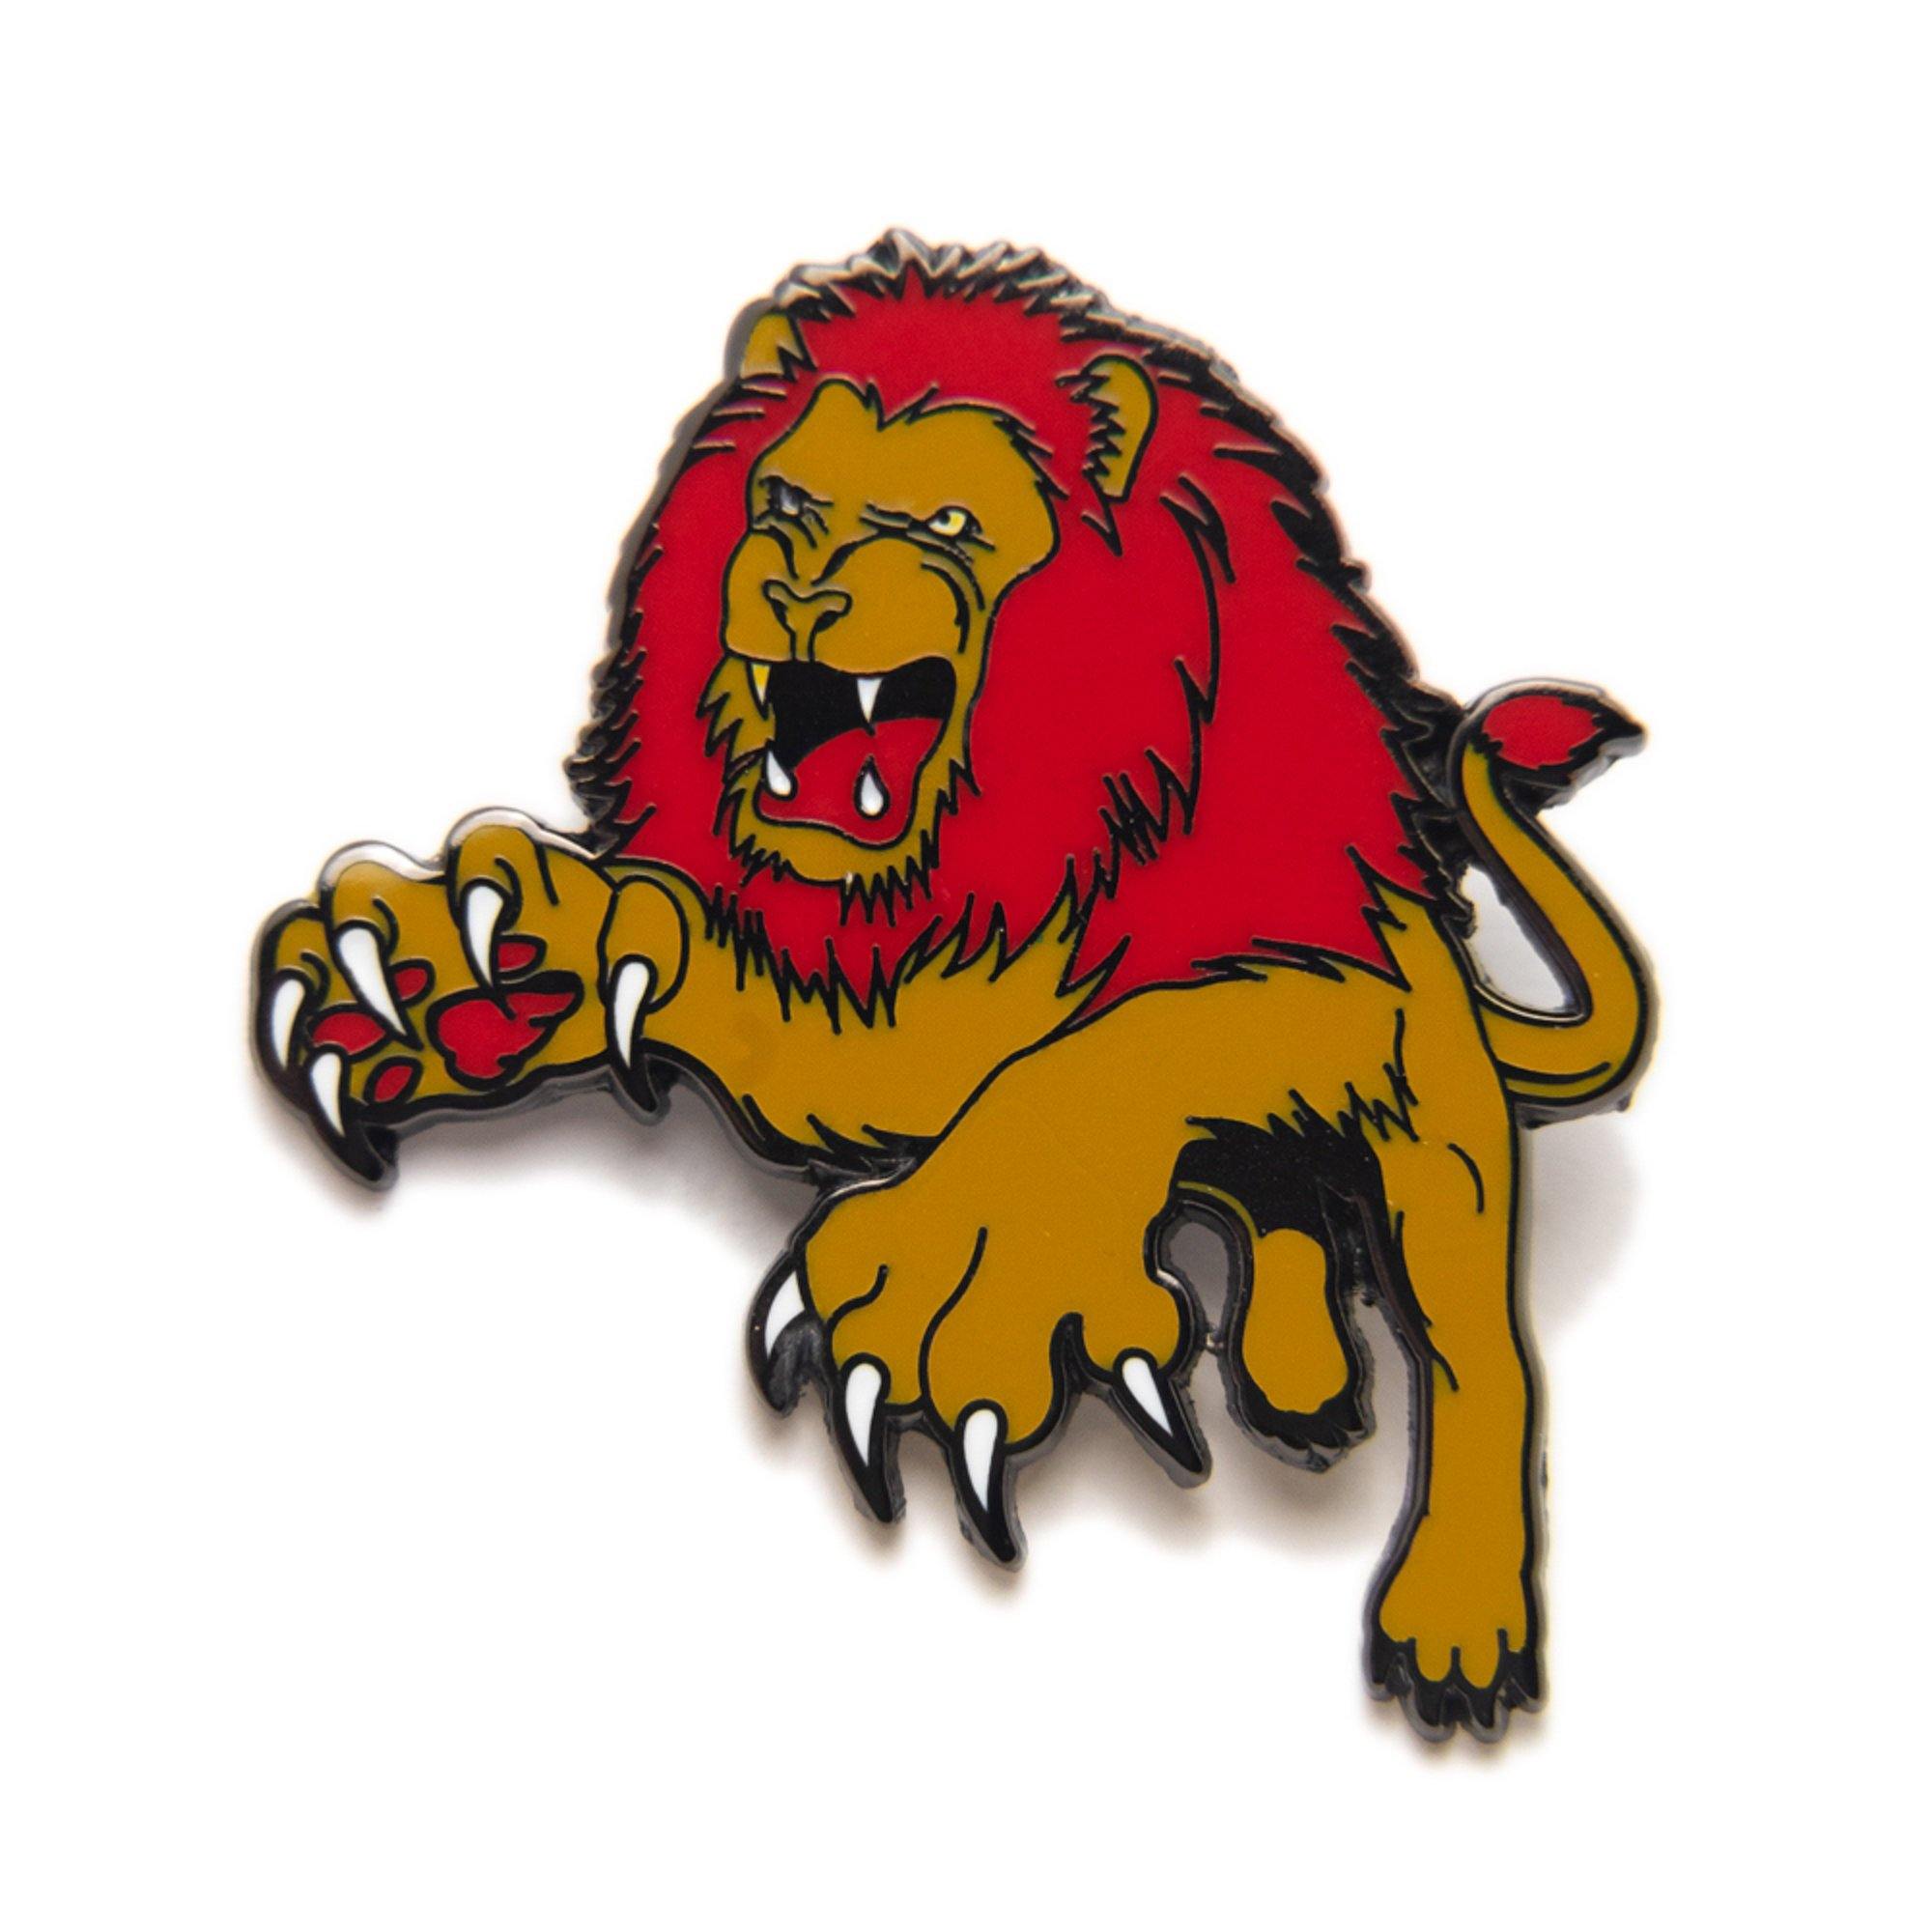 Gryffindor Pin Enamel Badge Harry Potter Lion Bravery Inspired Gift For Her/Him - Pin Ace